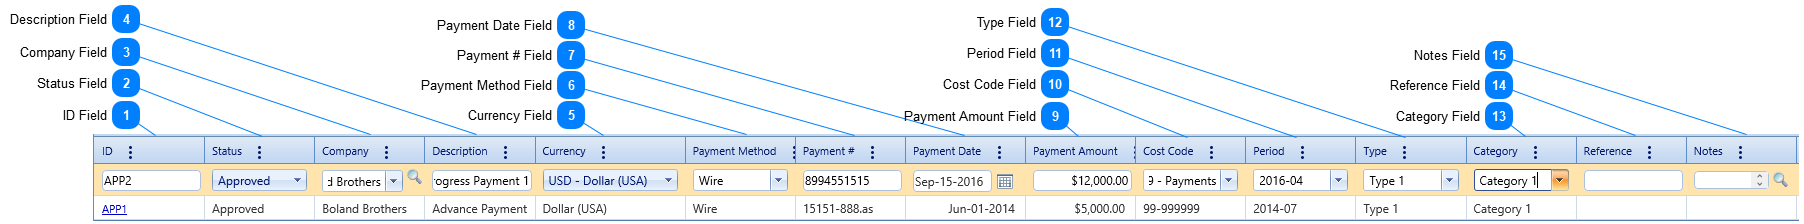 Payments Tab Table